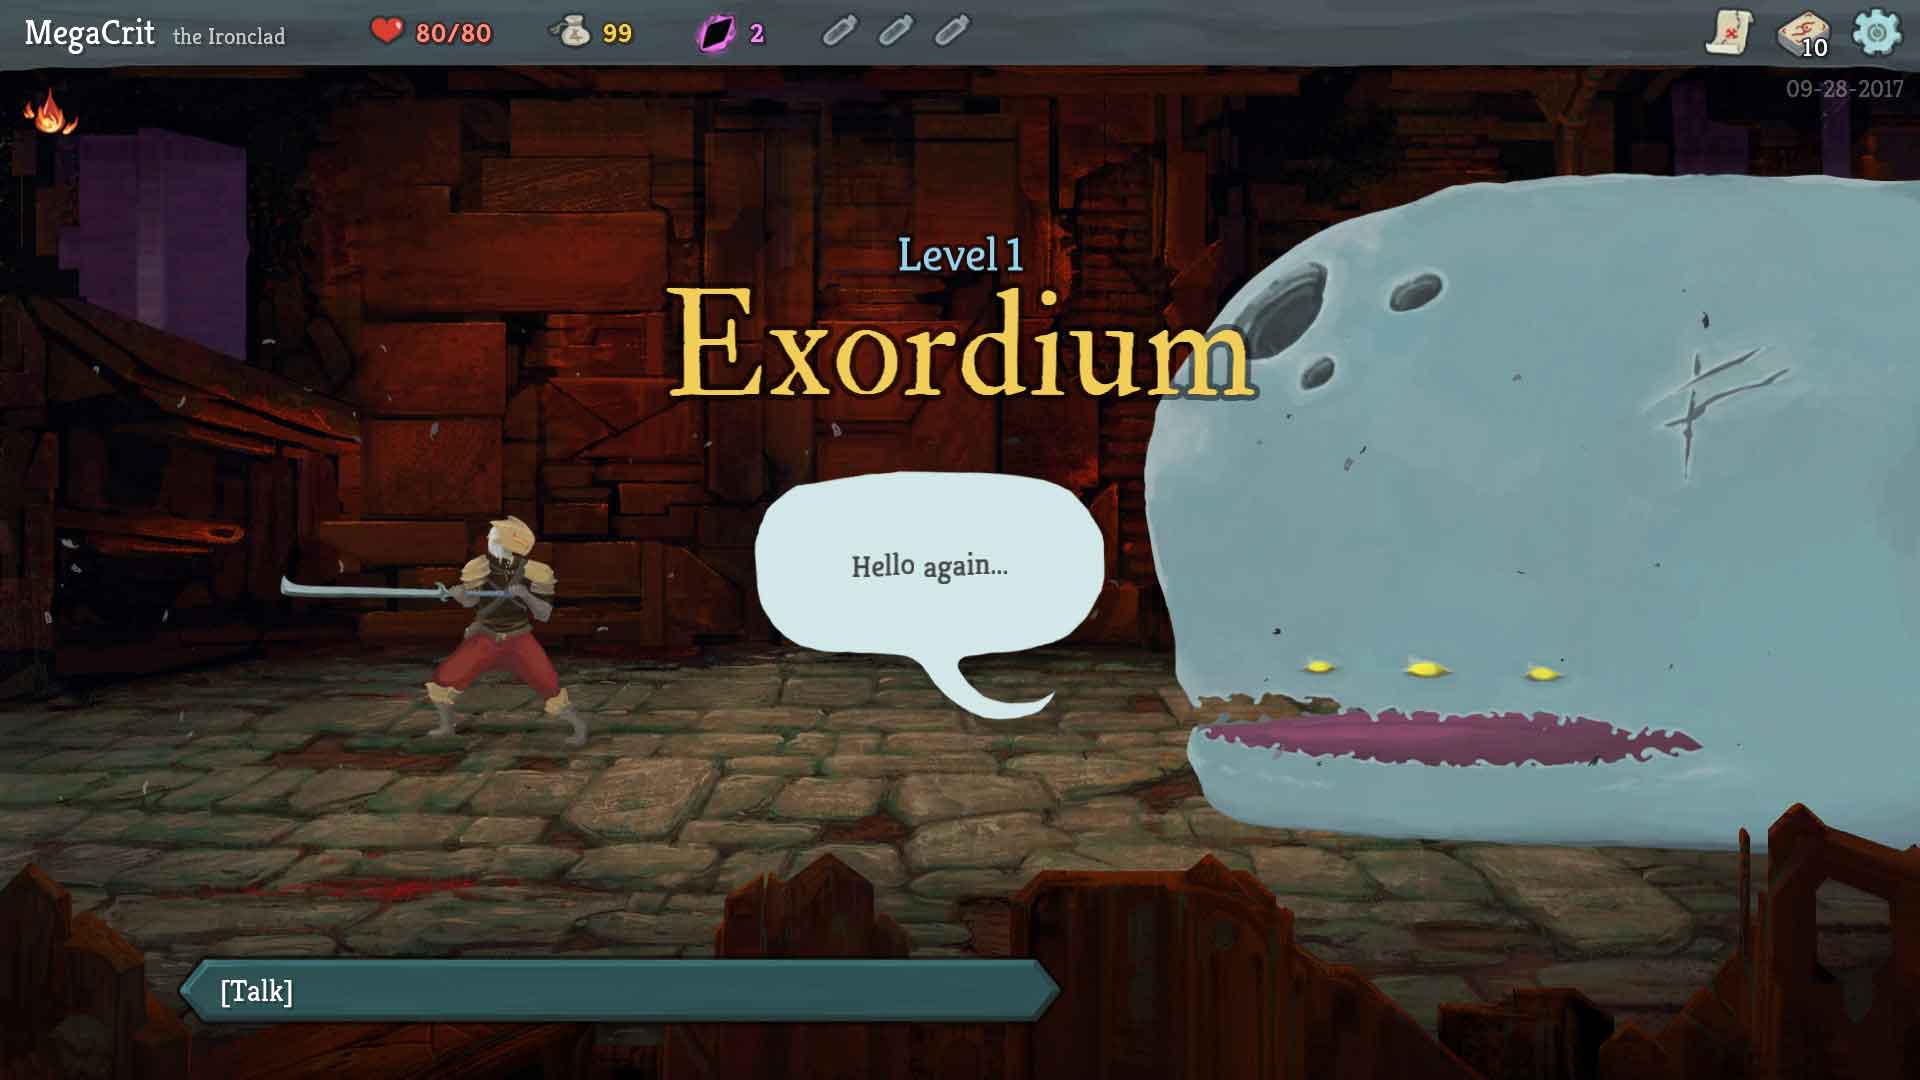 download slay the spire akabeko